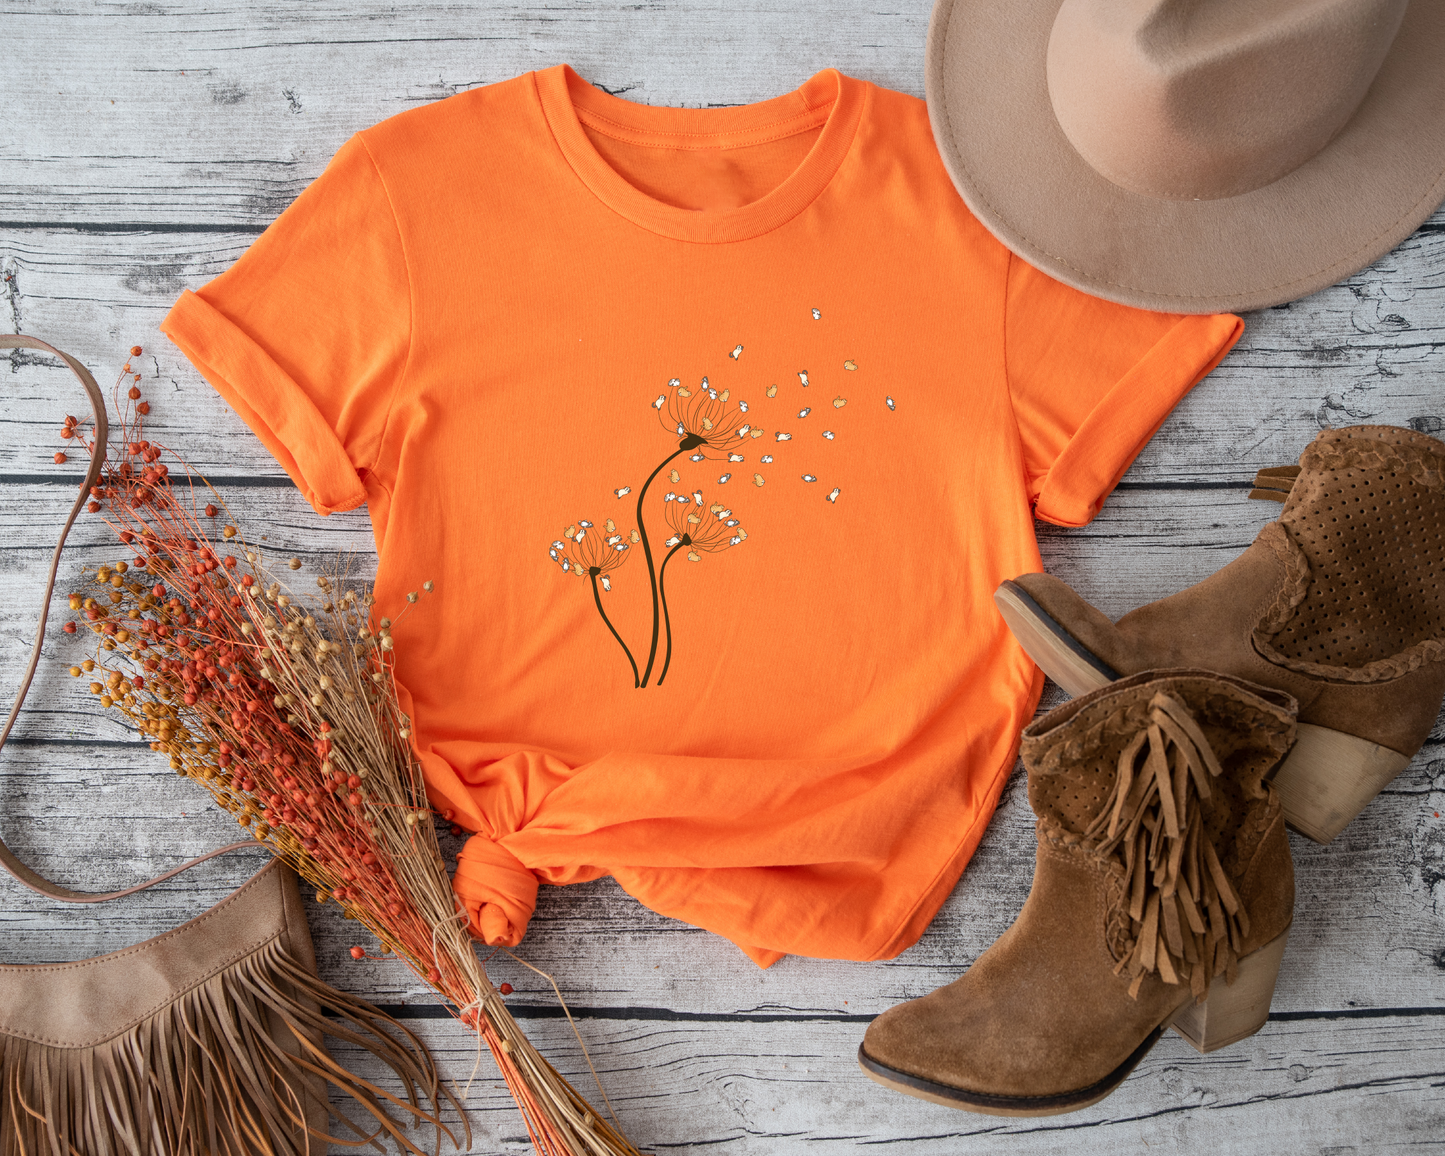 Show your love for dandelions and their whimsical seeds with this delightful "Flower Fly Dandelion" tee